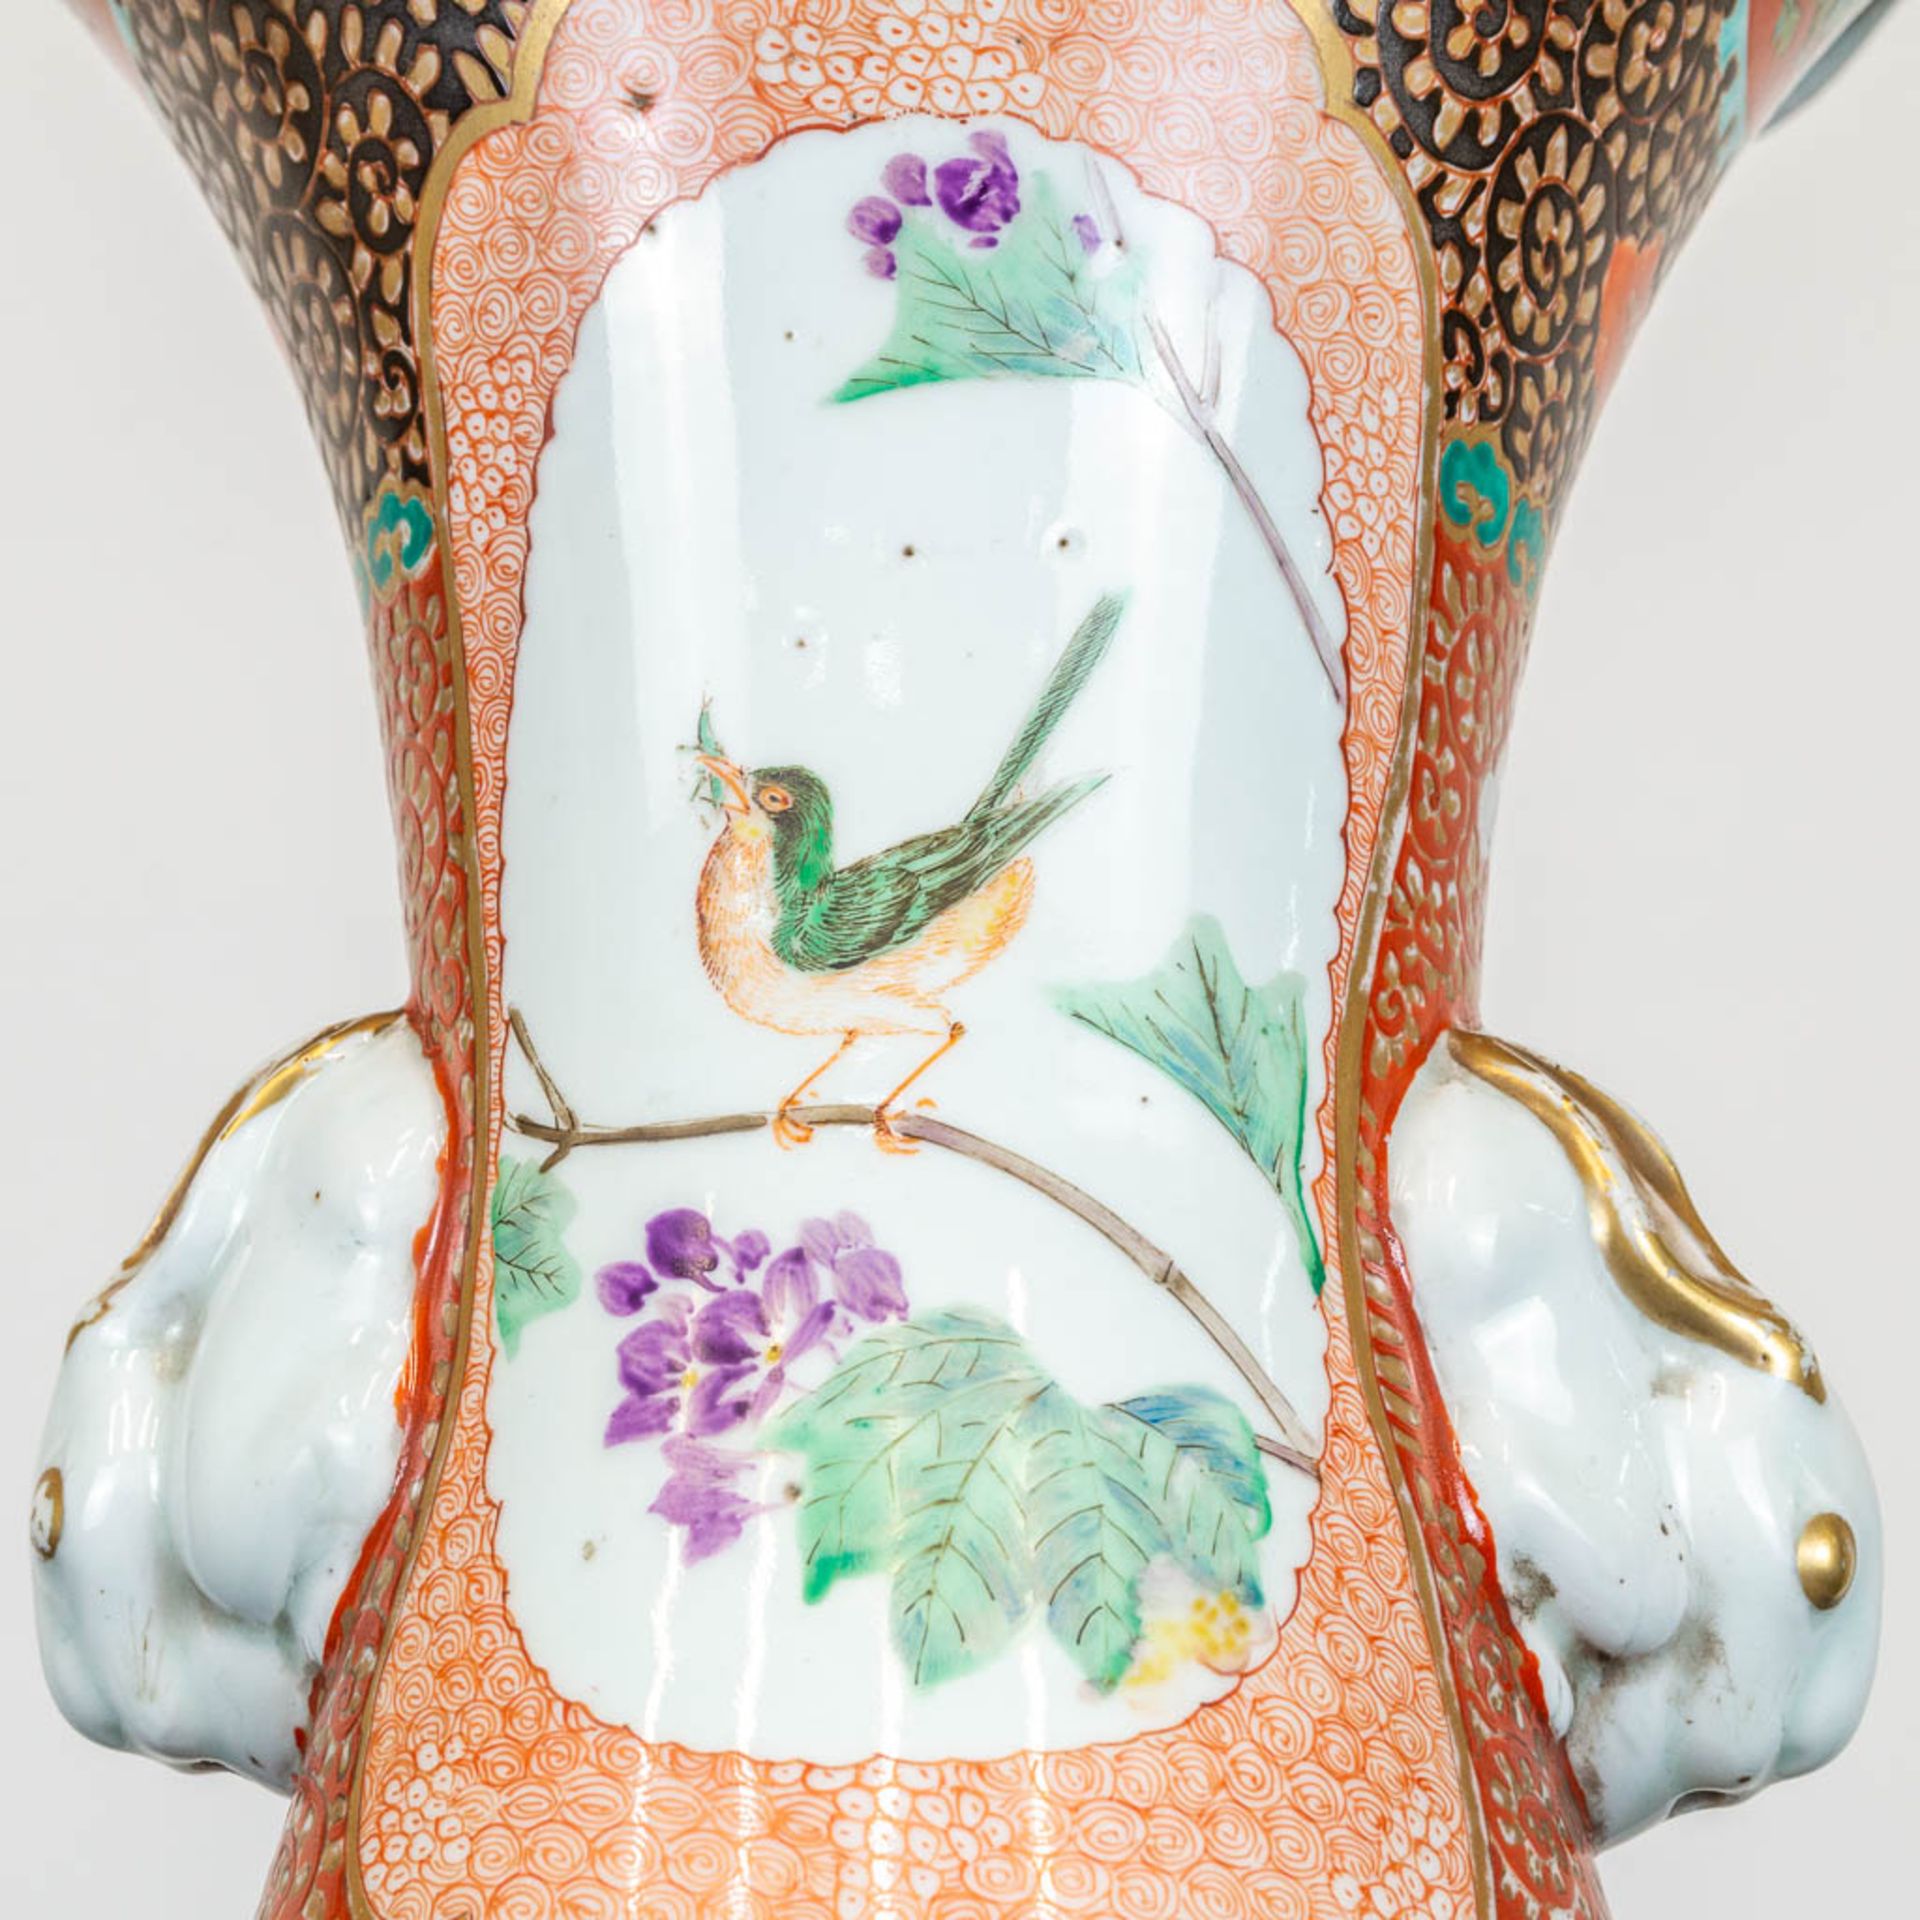 A large vase made of Japansese porcelain, decorated with blossoms. 19th/20th century. (106 x 40 cm) - Image 4 of 9